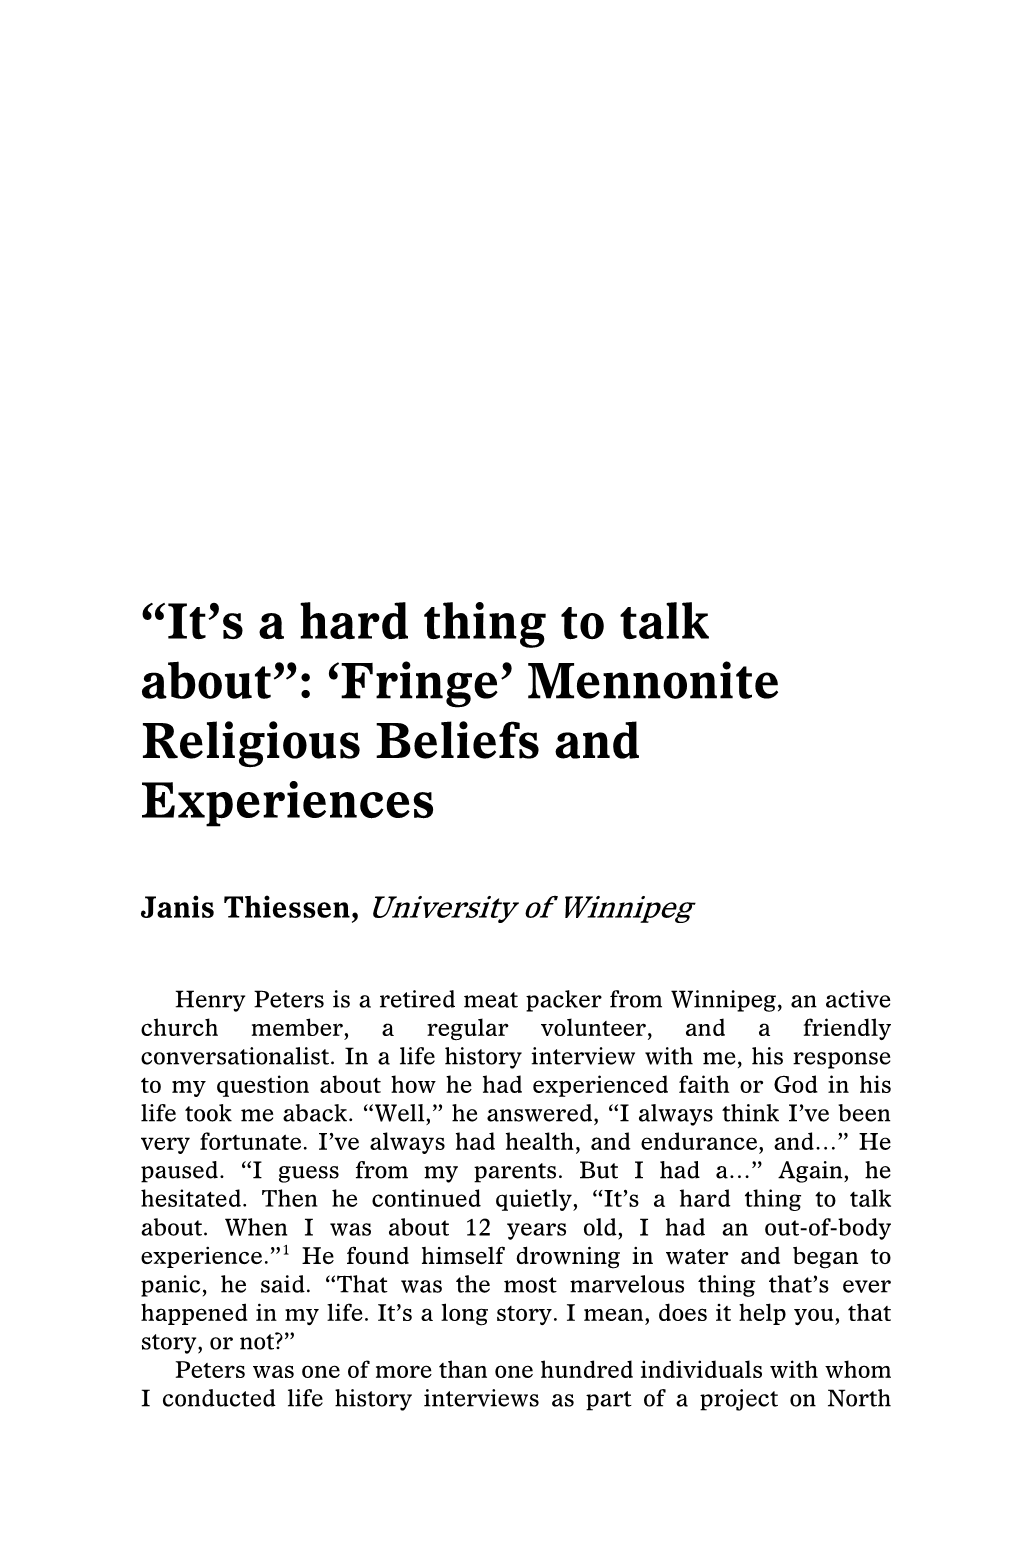 “It's a Hard Thing to Talk About”: 'Fringe' Mennonite Religious Beliefs And